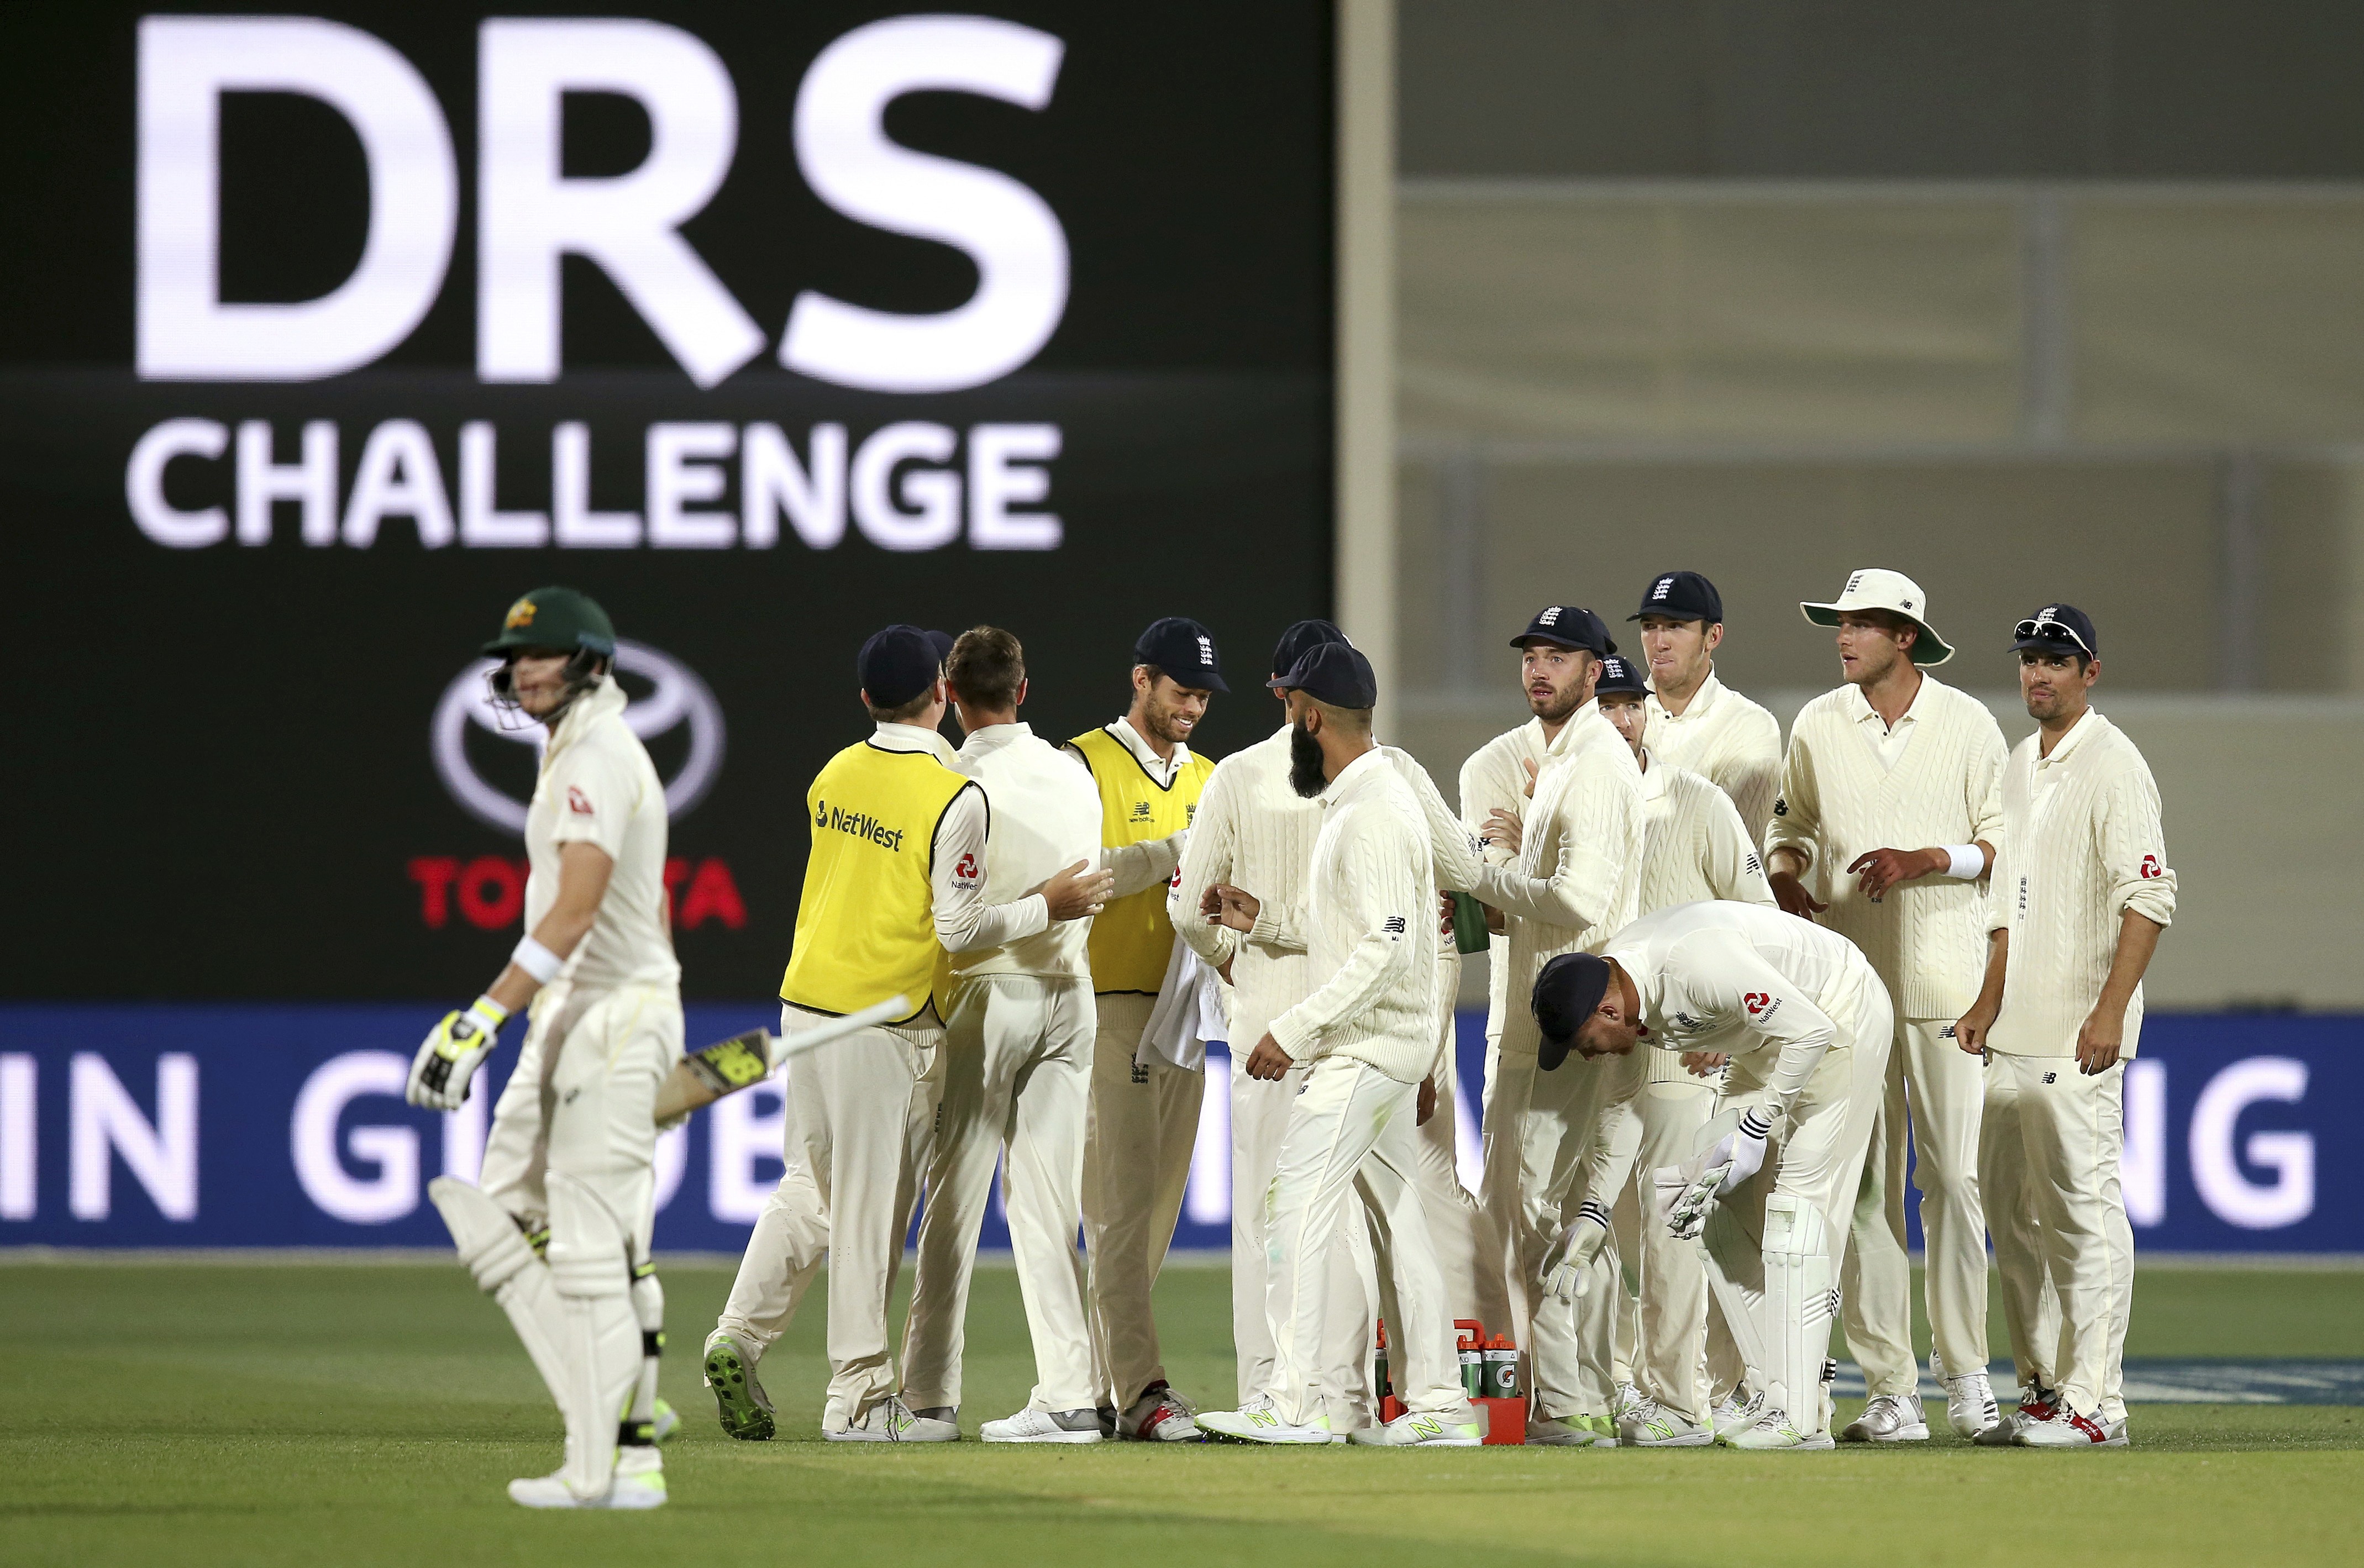 Aussie skipper Steve Smith leaves the field after losing his appeal against an lbw decision. Photo: AP